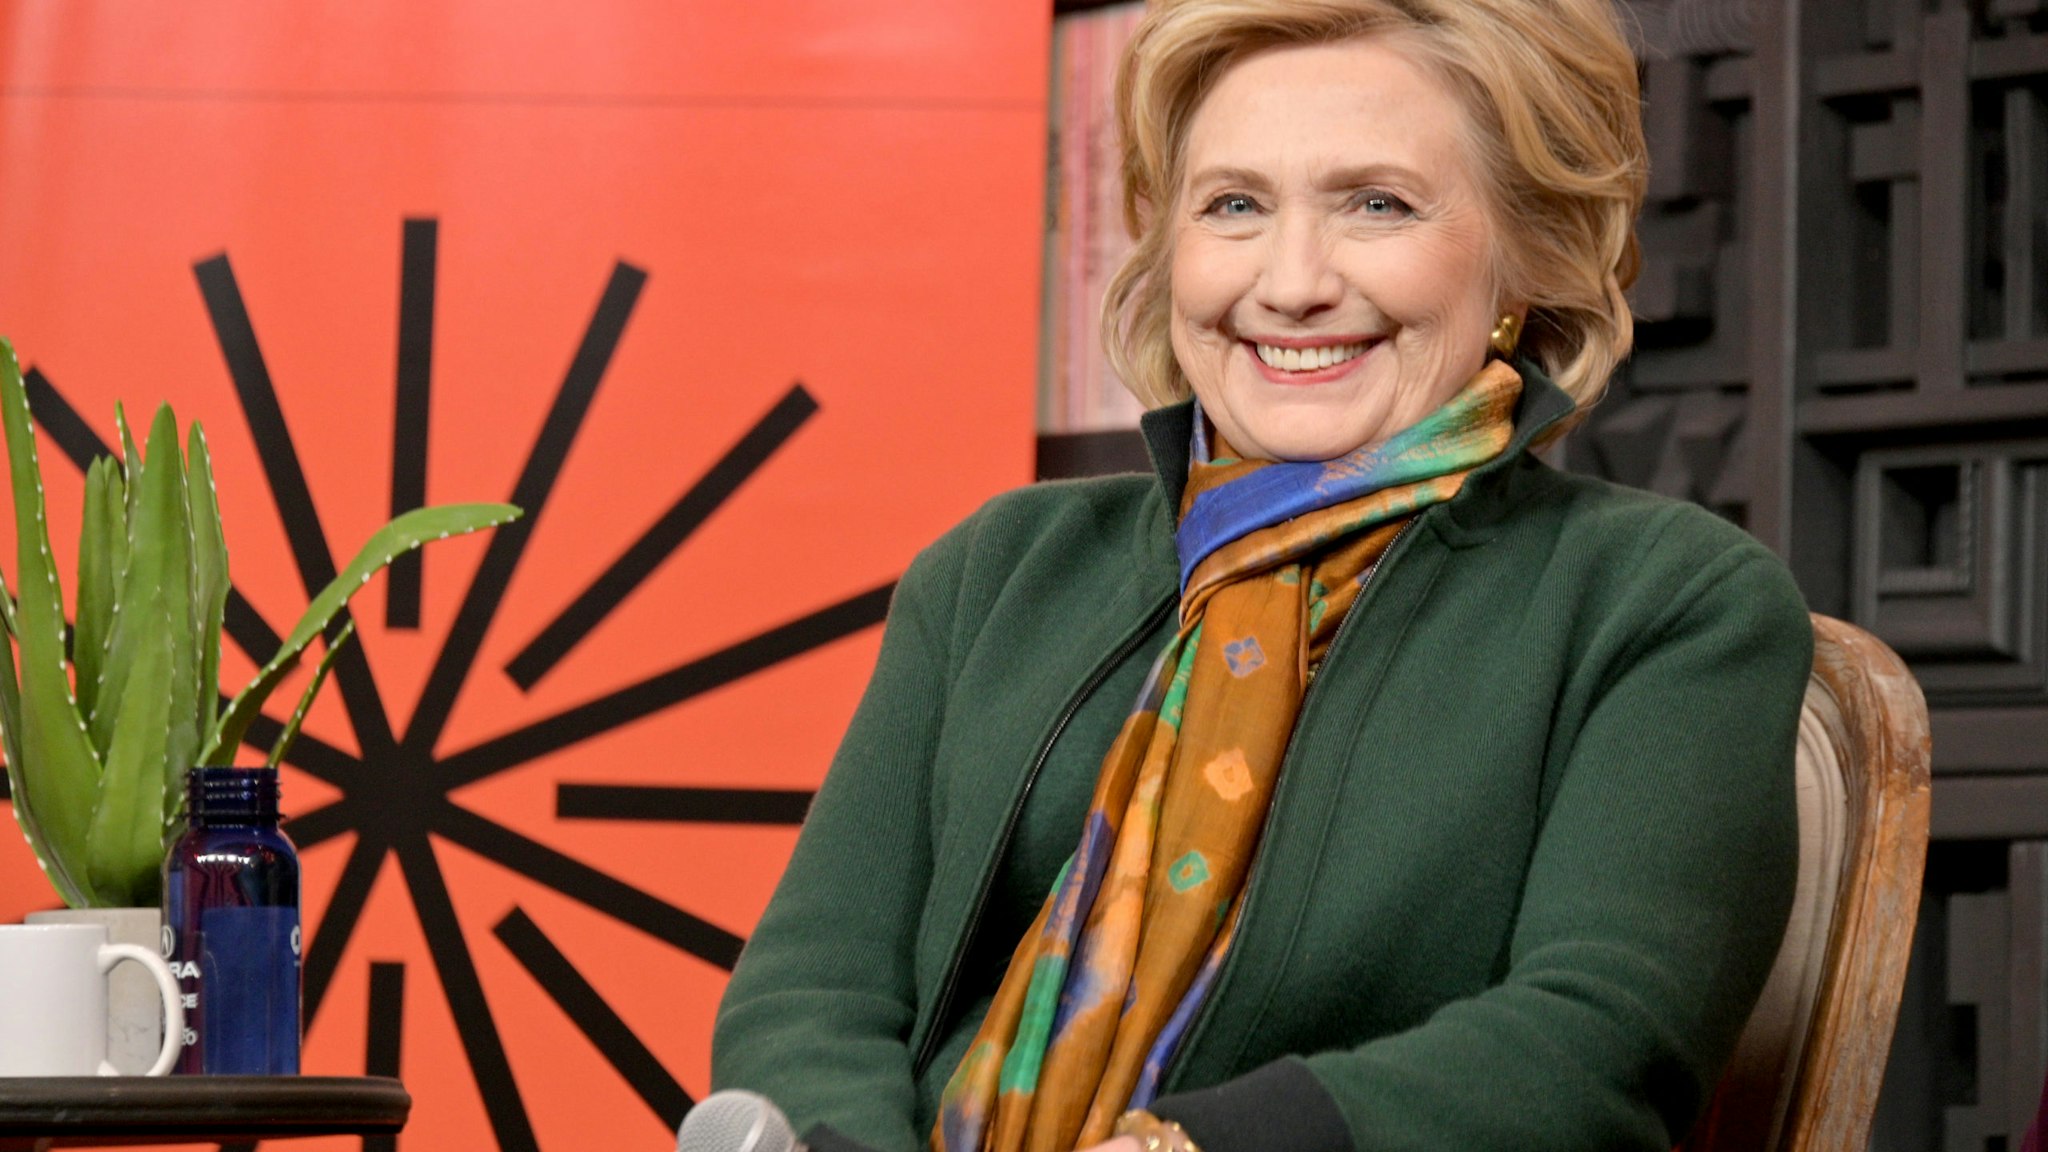 PARK CITY, UTAH - JANUARY 26: Former First Lady and Secretary of State Hillary Rodham Clinton speaks onstage at Cinema Cafe during the 2020 Sundance Film Festival at the Filmmaker Lodge on January 26, 2020 in Park City, Utah. (Photo by Michael Loccisano/Getty Images)